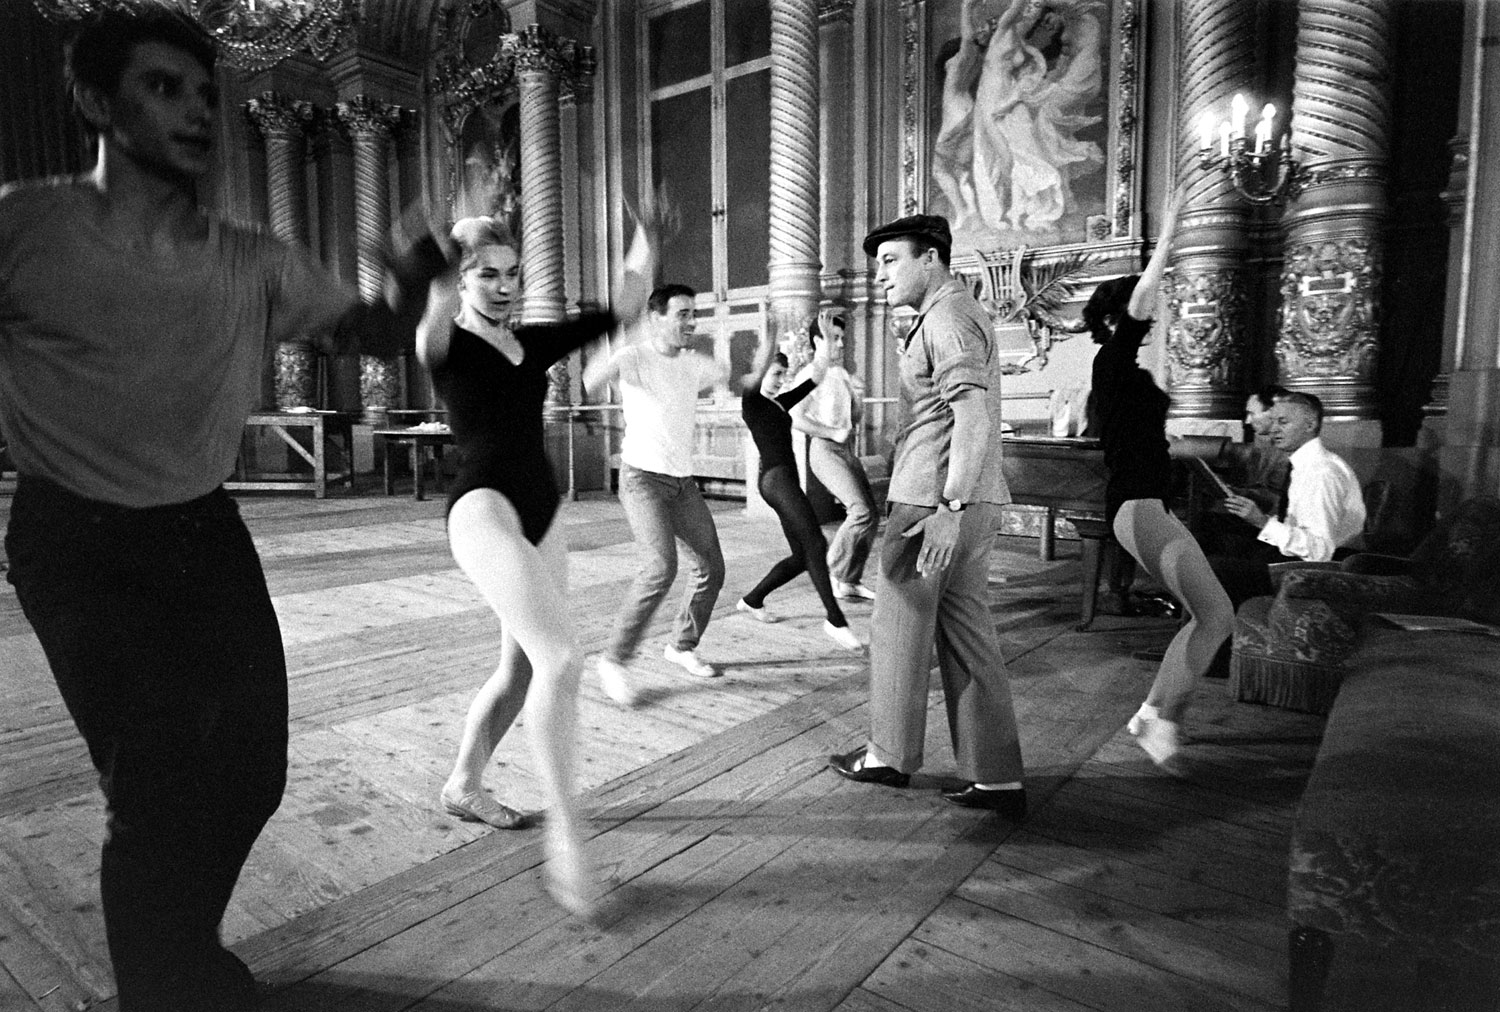 Gene Kelly rehearses with ballerina Claude Bessy and other dancers, Paris, 1960.